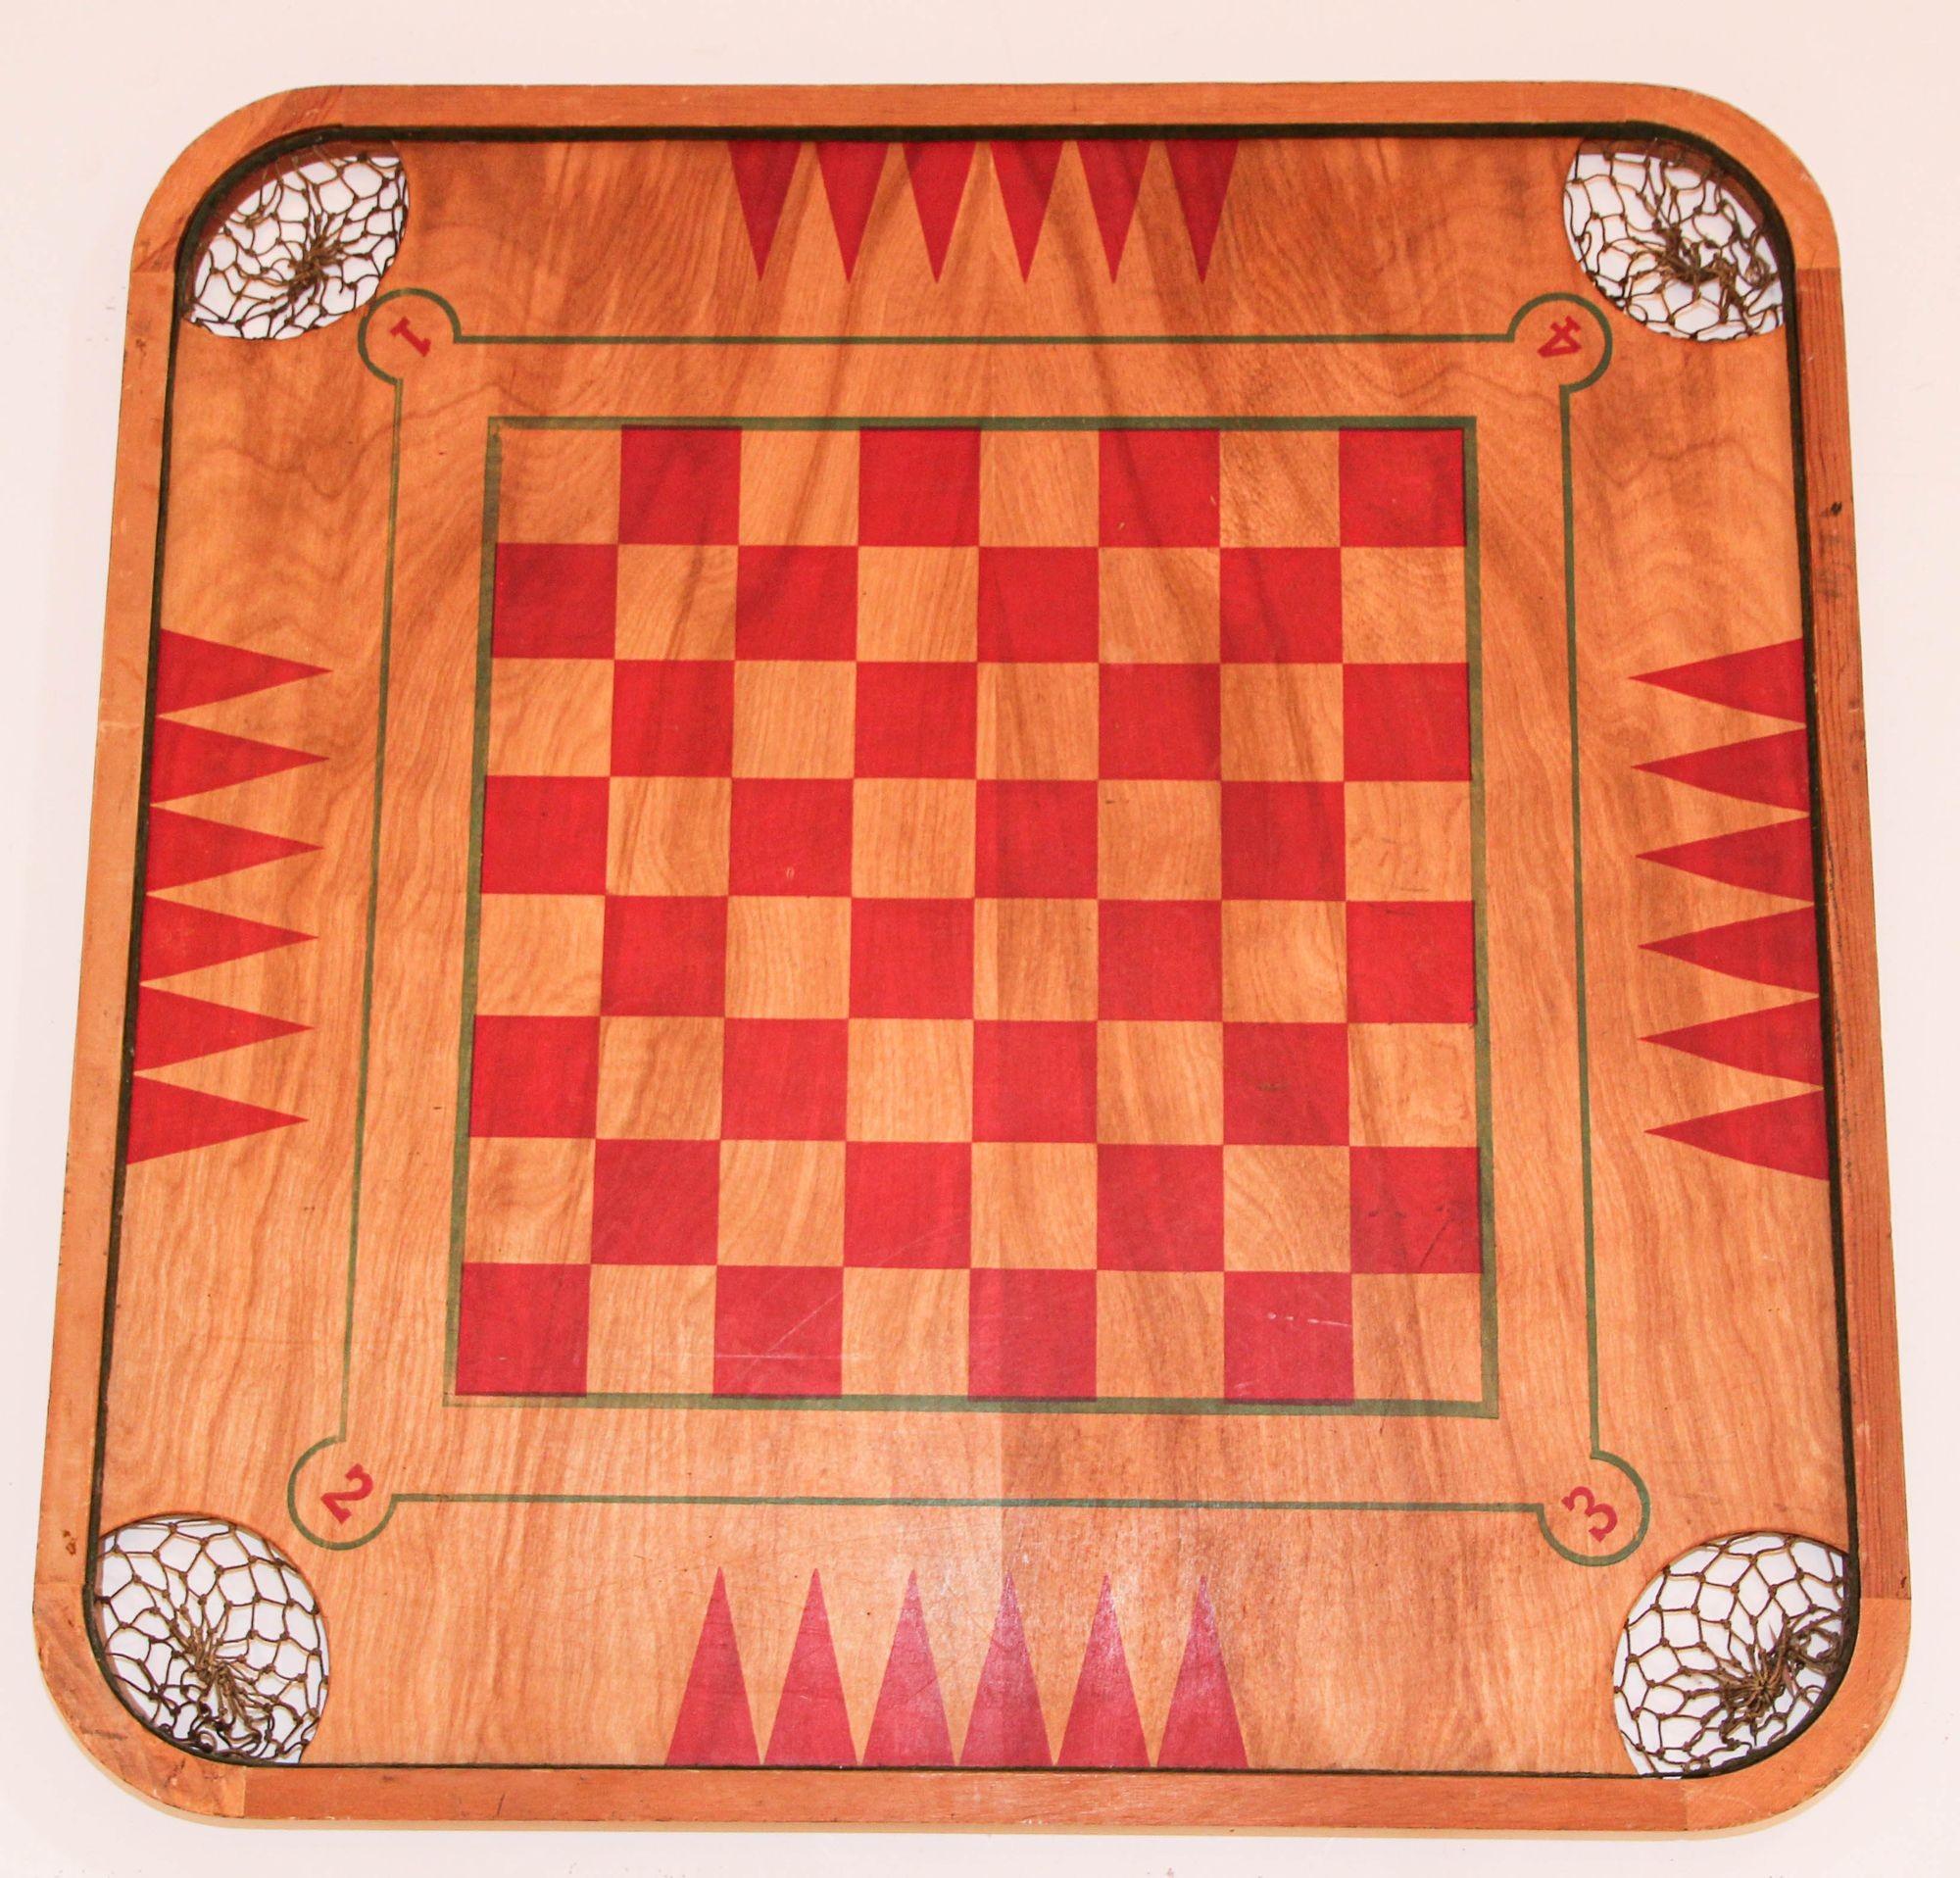 Antique carrom large wooden game board double-sided.
Antique Carrom Company 1907 wood game board double sided, made in USA.
Each corner of the board contains a rope-strung pocket.
This game board with multi surface combination board was